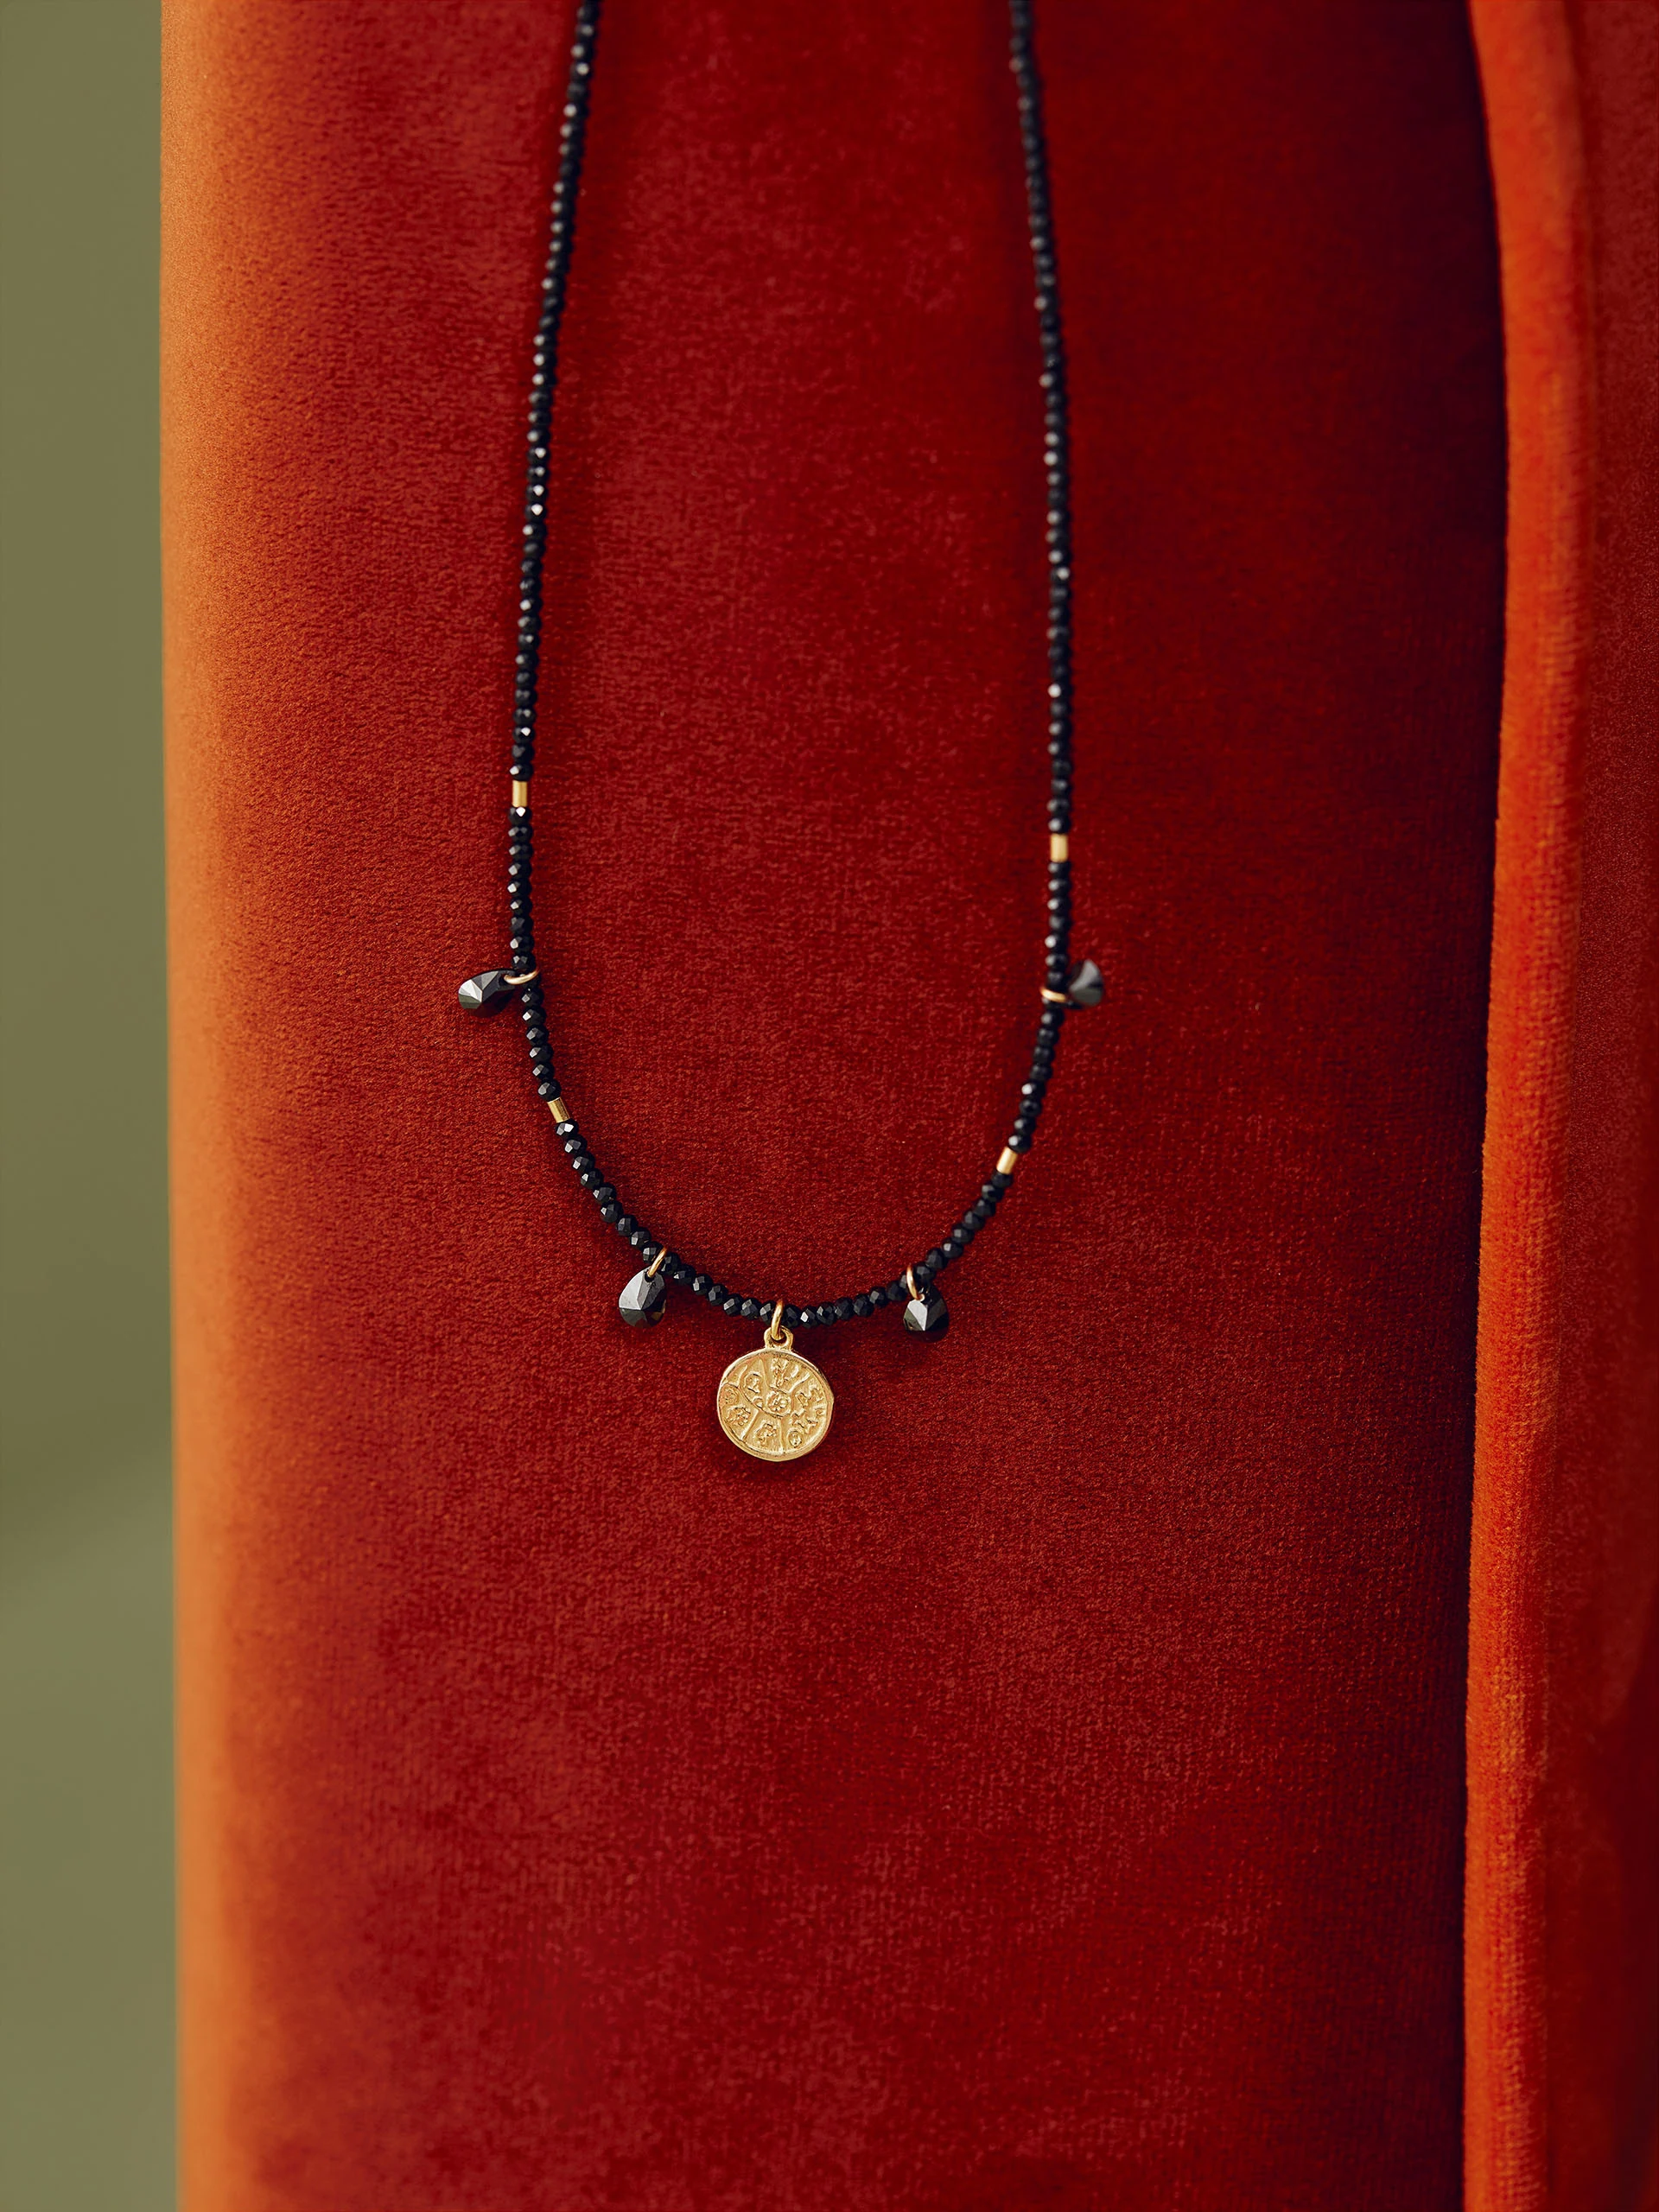 NECKLACE WITH A COIN